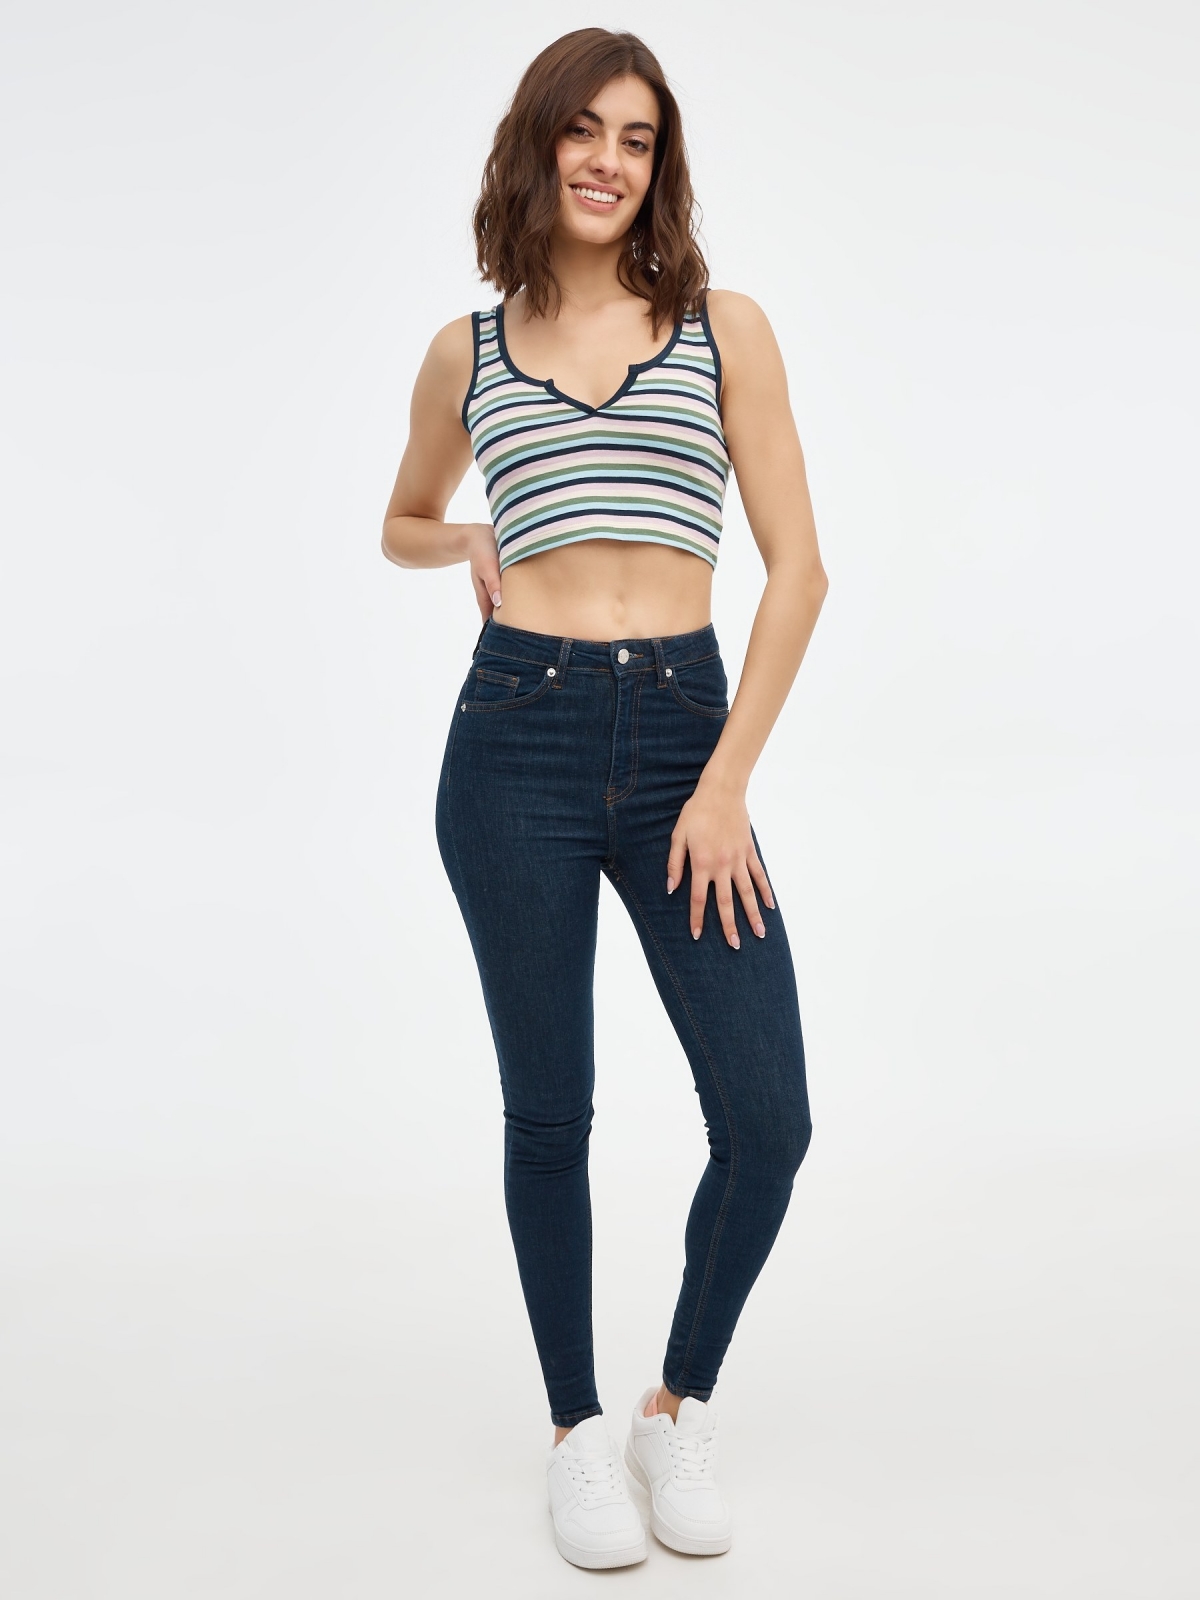 Striped Crop Top olive green front view